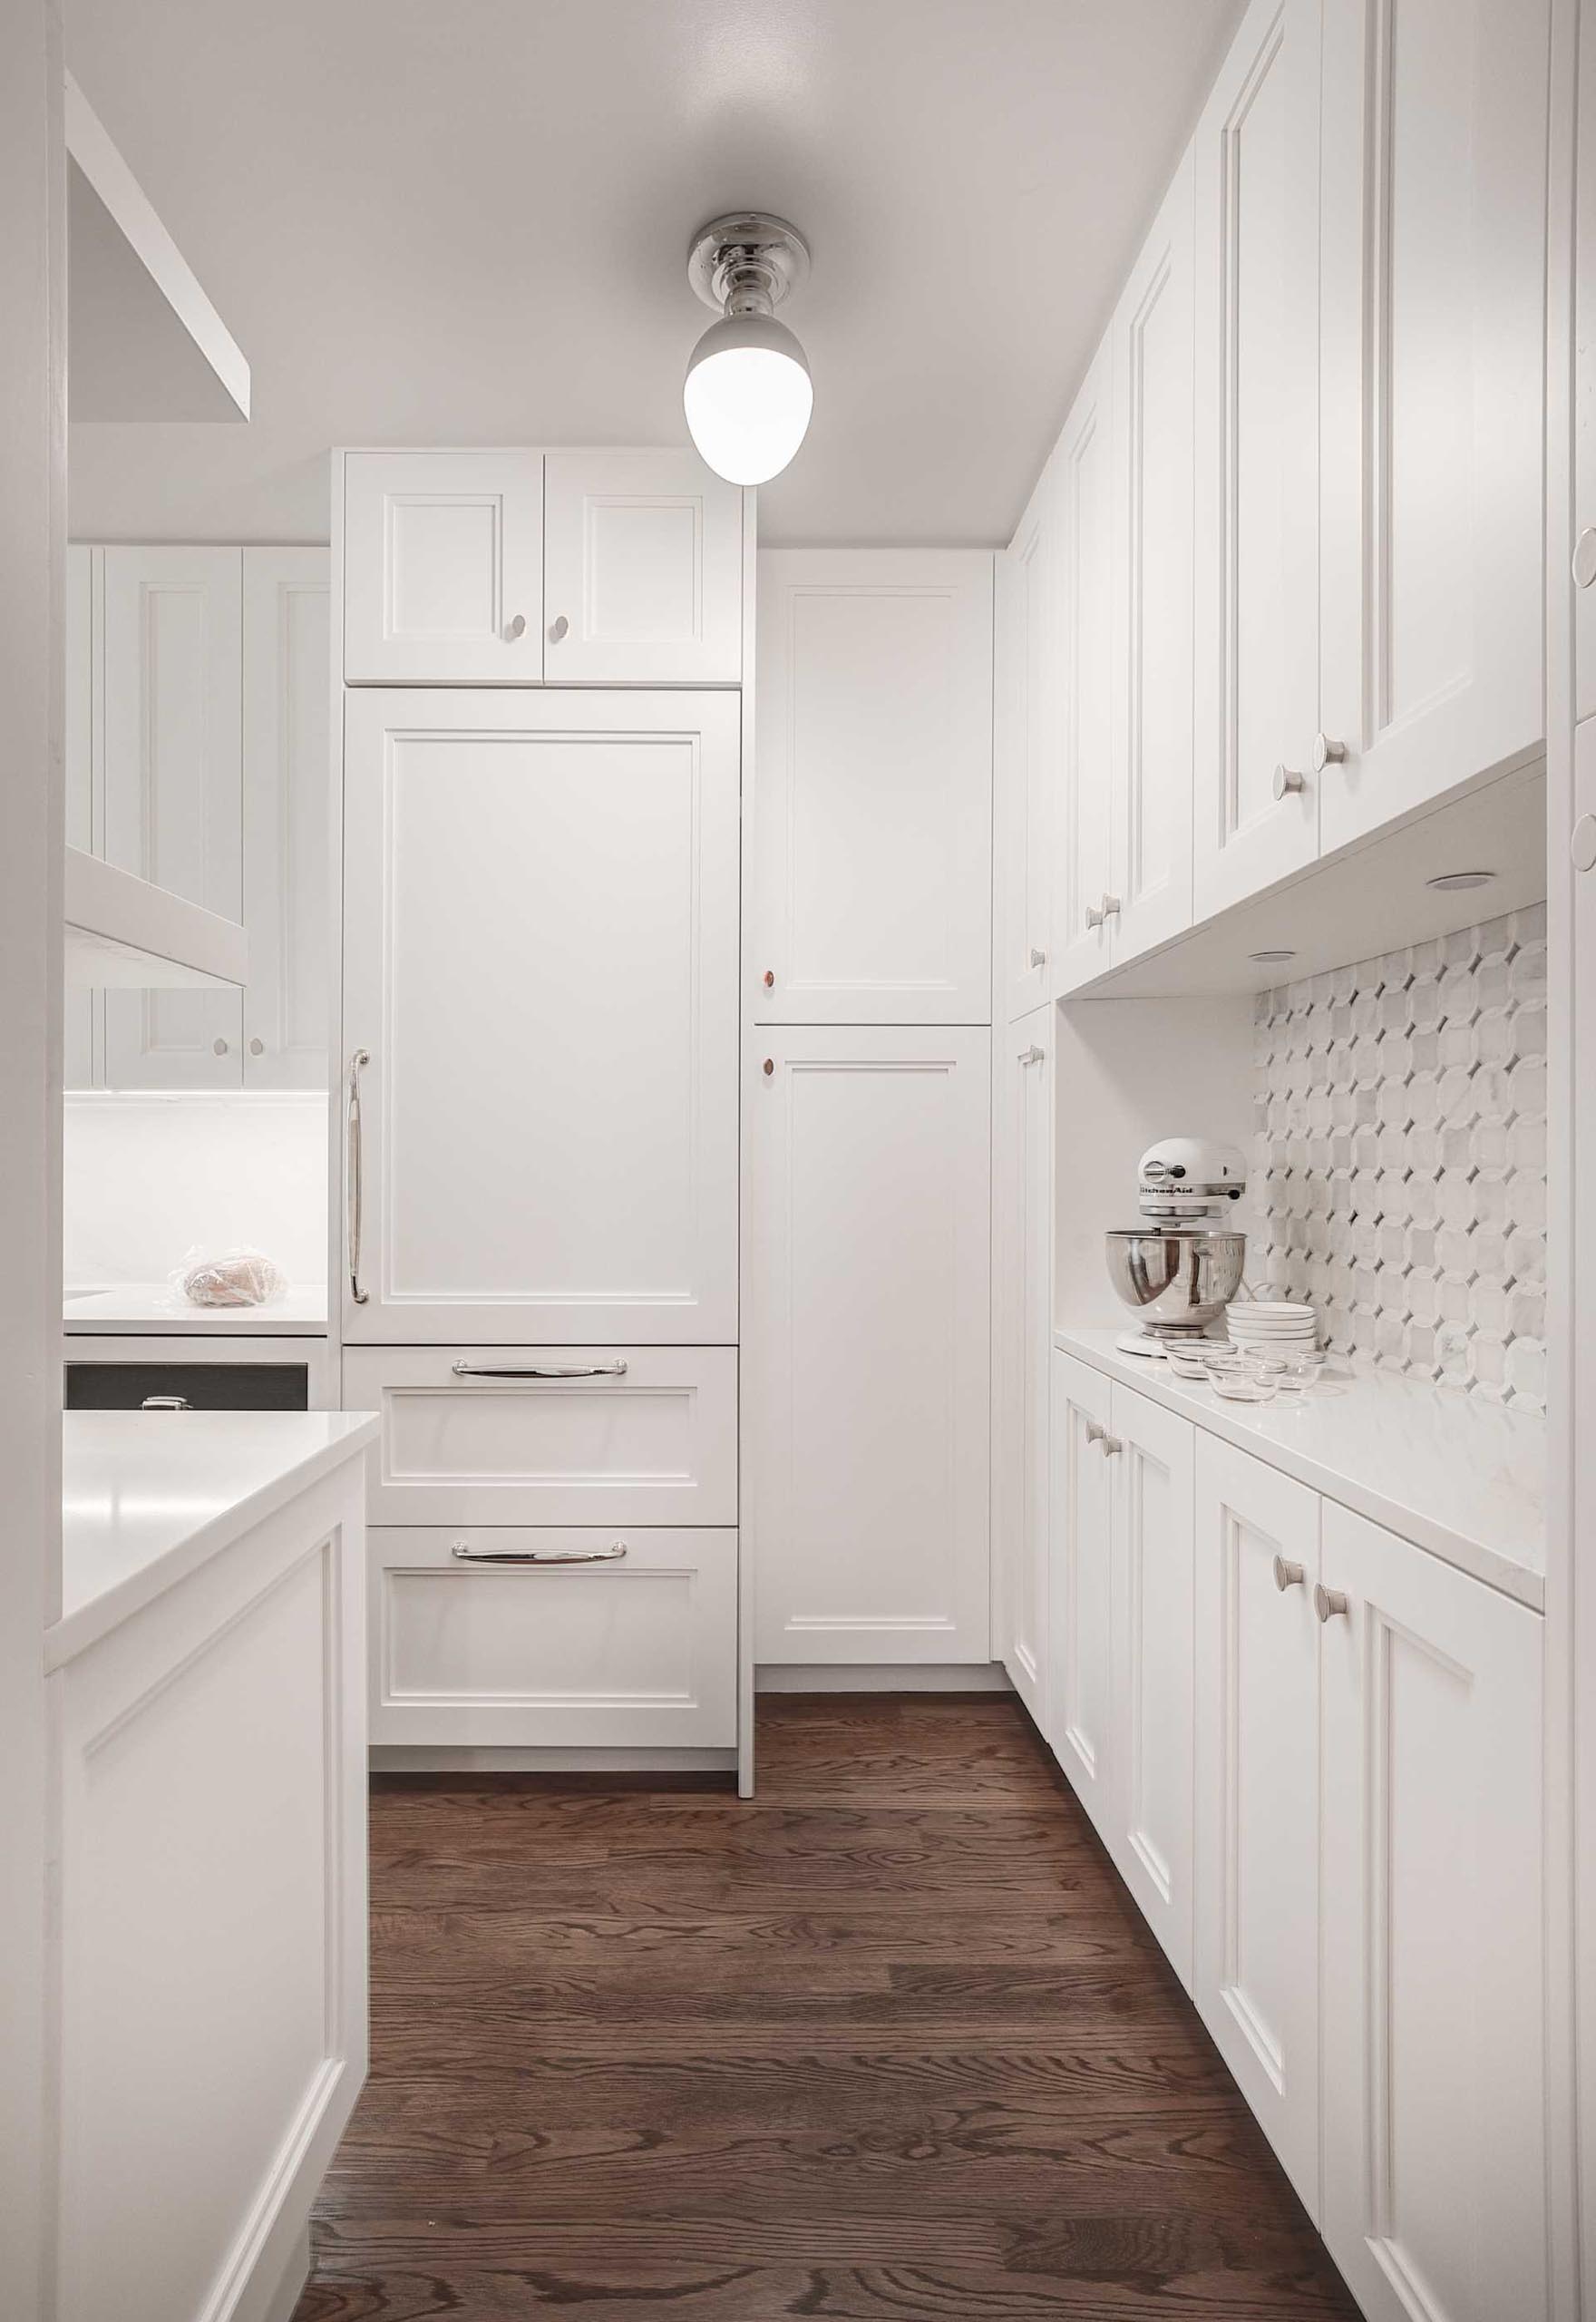 A contemporary kitchen with an integrated fridge, whose front matches the surrounding white cabinets.